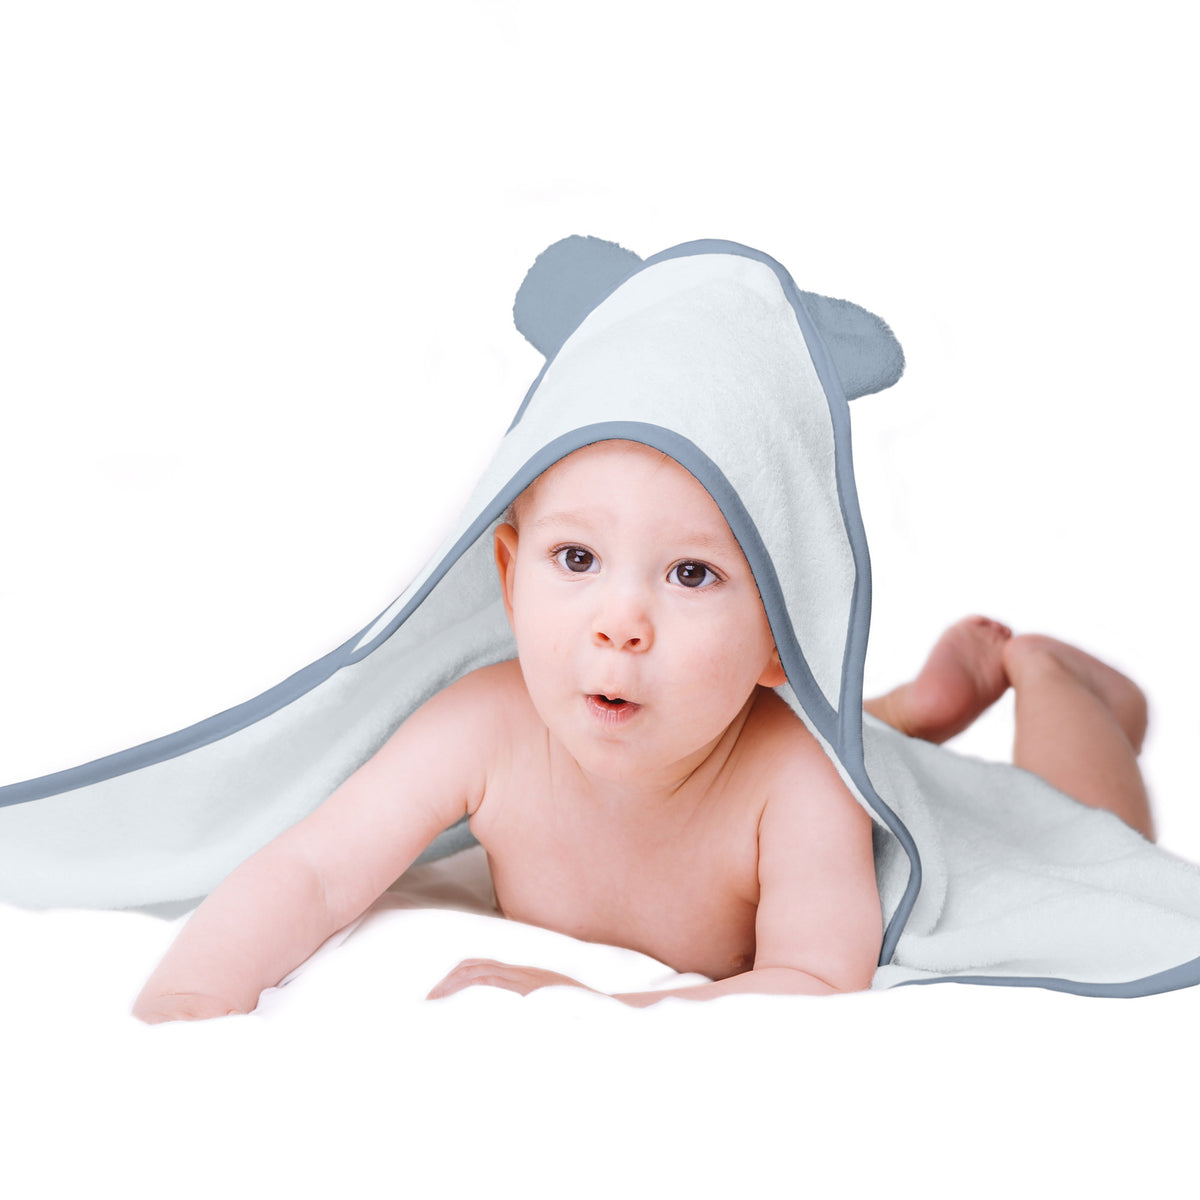 Nozone hooded baby towel with ears for beach or bath